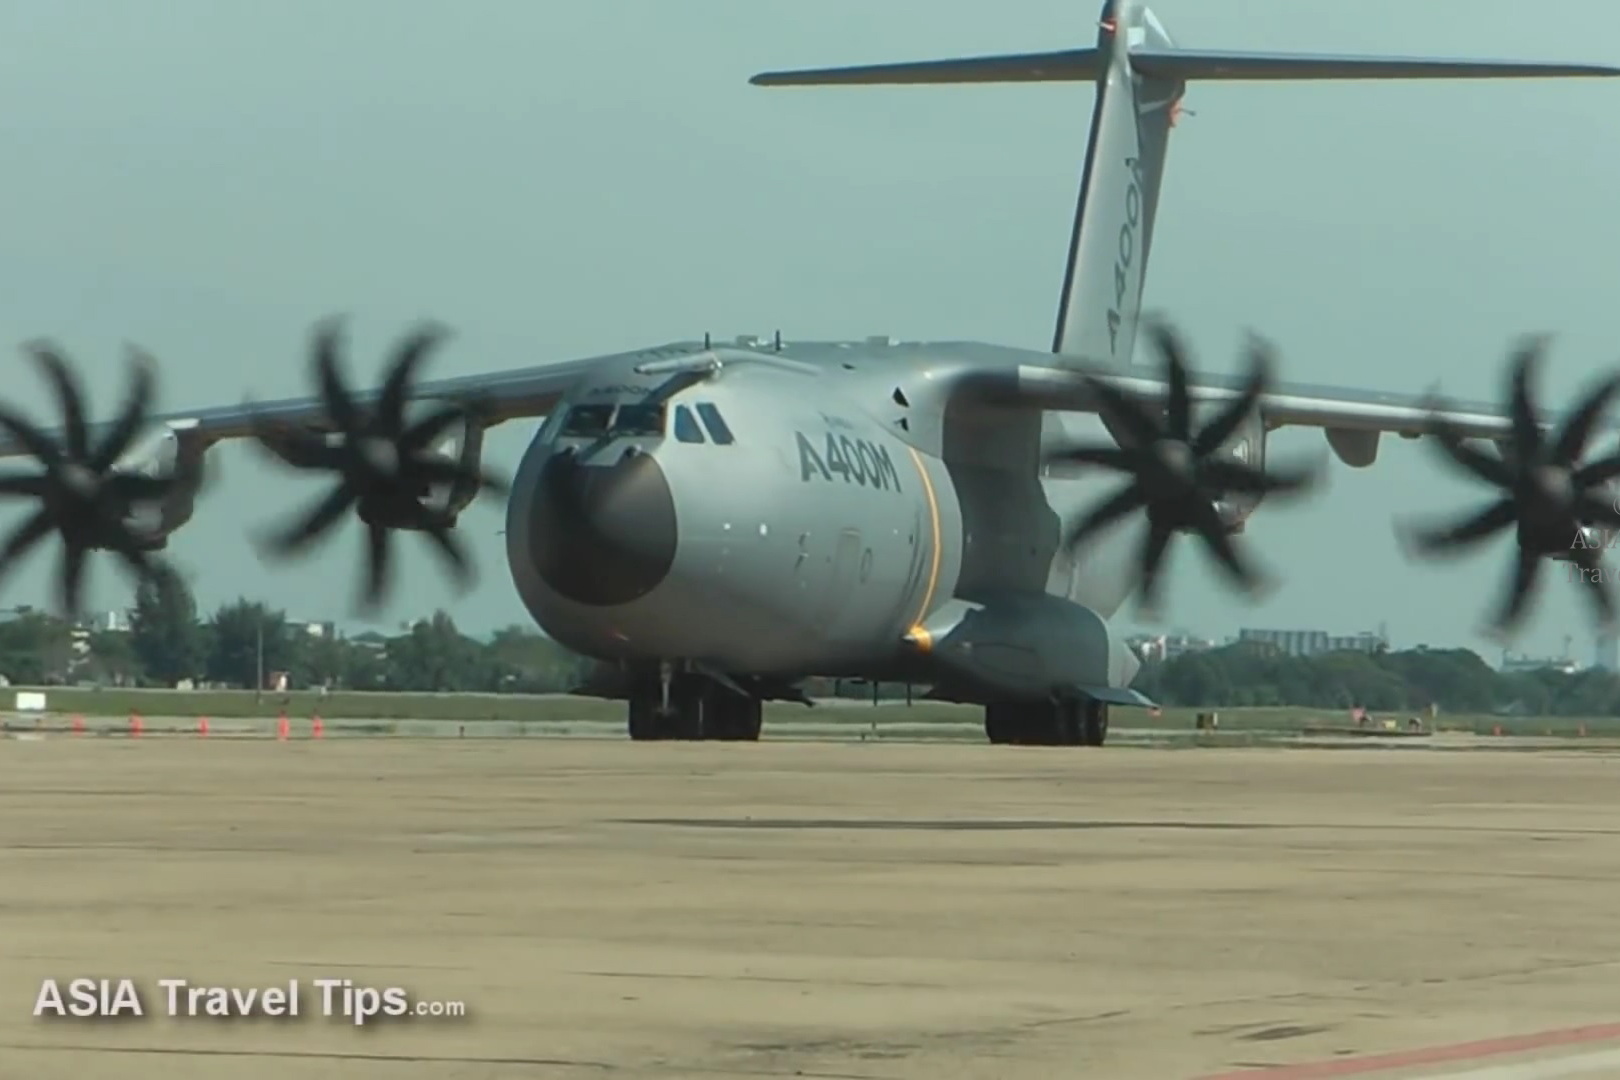 A400M landing in Bangkok, Thailand in 2012. Picture by Steven Howard of TravelNewsAsia.com Click to enlarge.